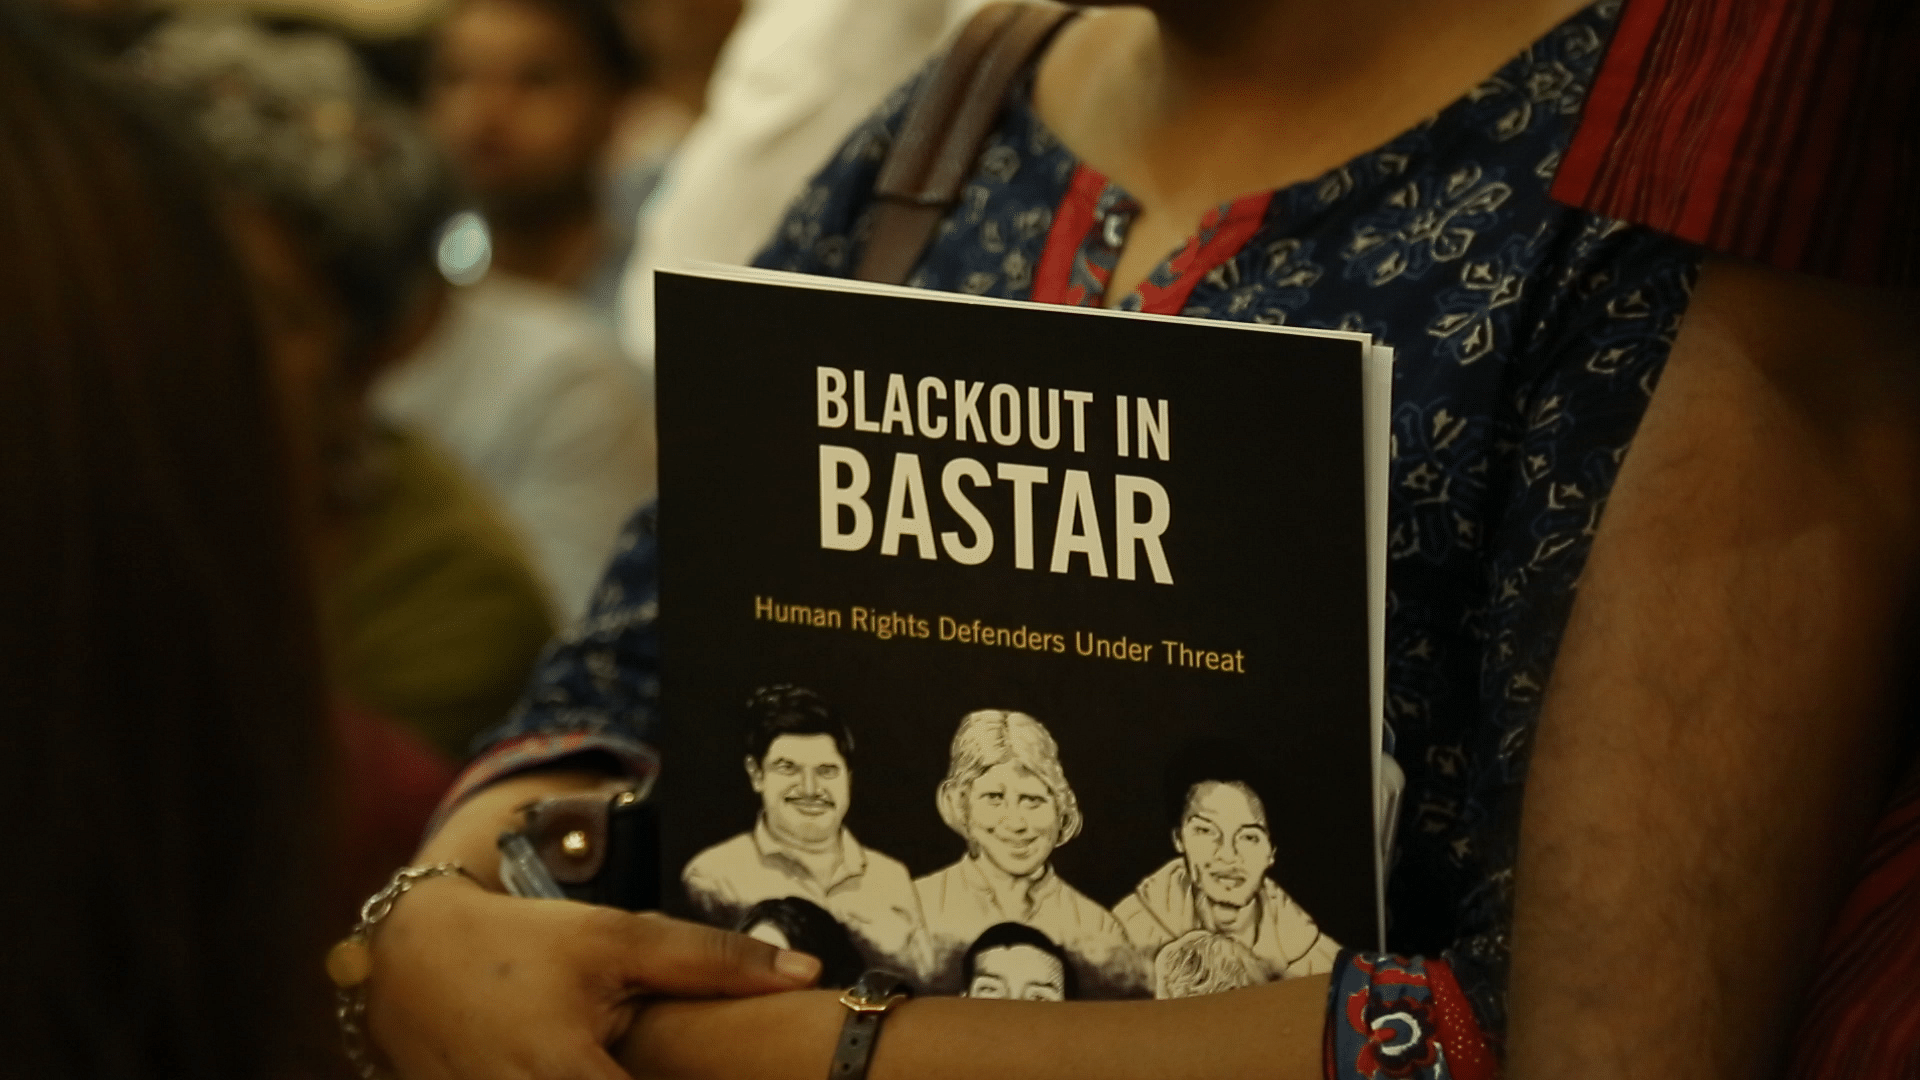 Amnesty International released a 24-page report on the crackdown in the state on the media and civil society in Bastar in Chattisgarh in April last year.